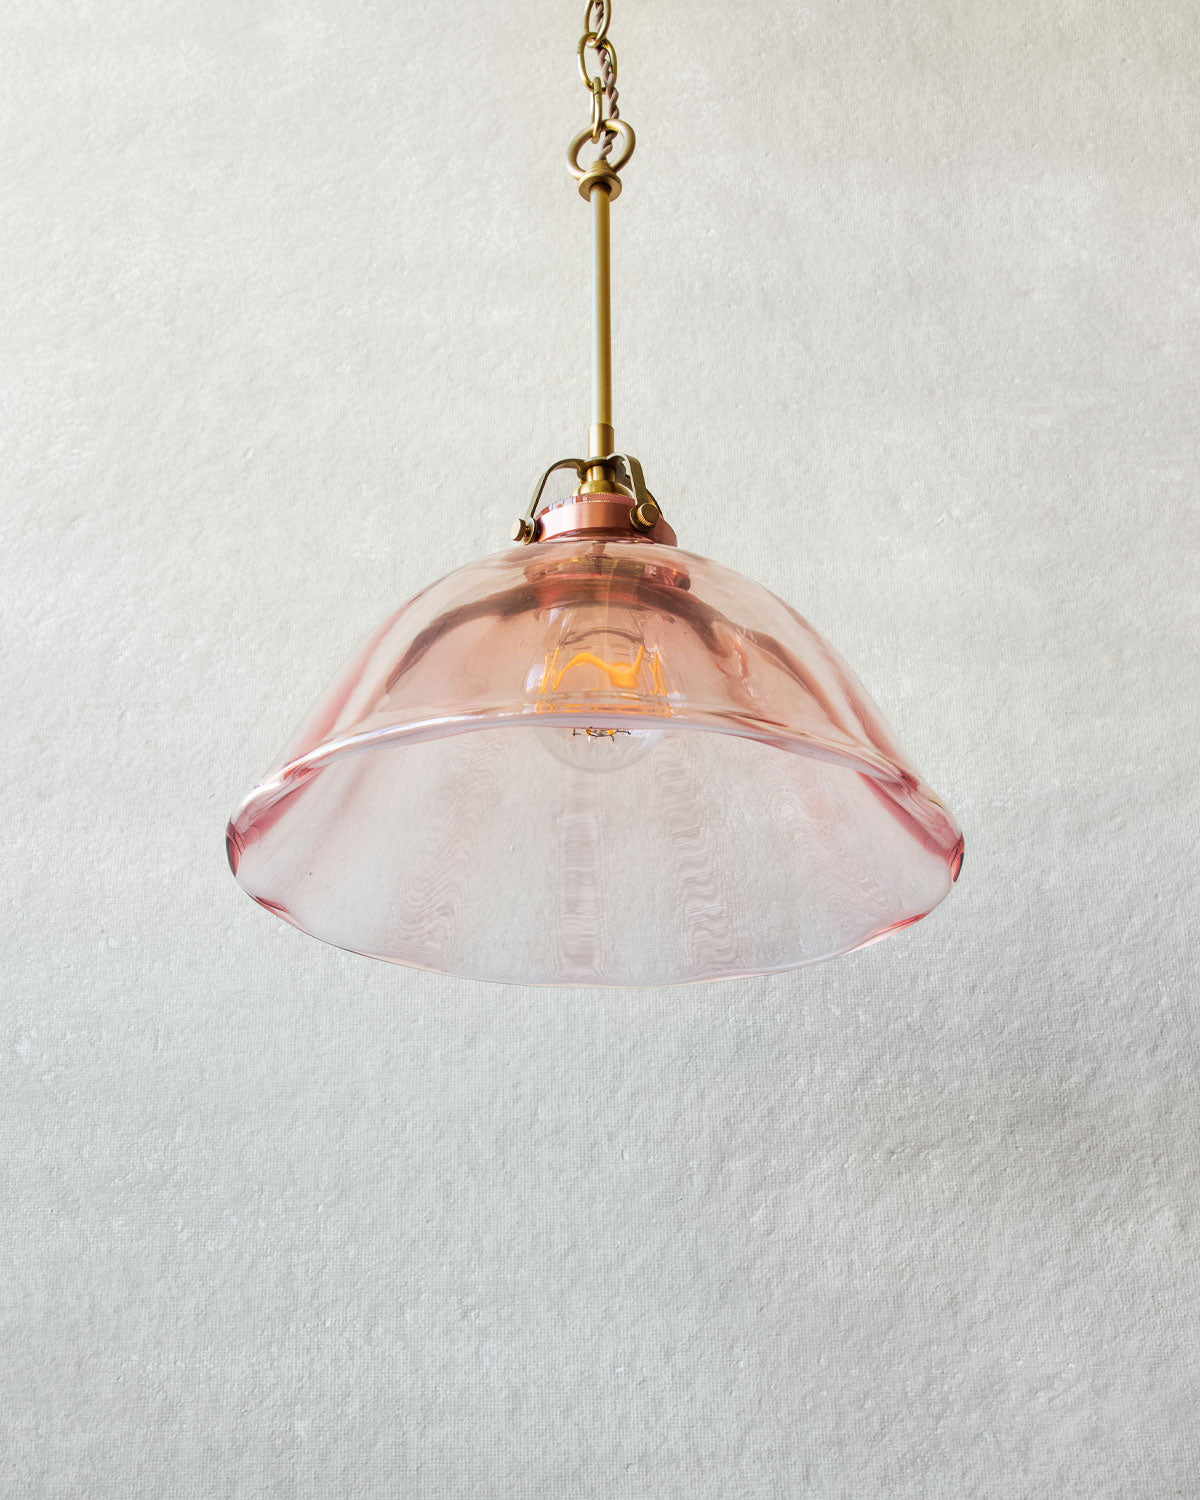 Rose Glass Pendant Light with satin brass cord set and chain.  Made by Lostine in Philadelphia. Hardwired fixture. Simple interior design, made in the USA.